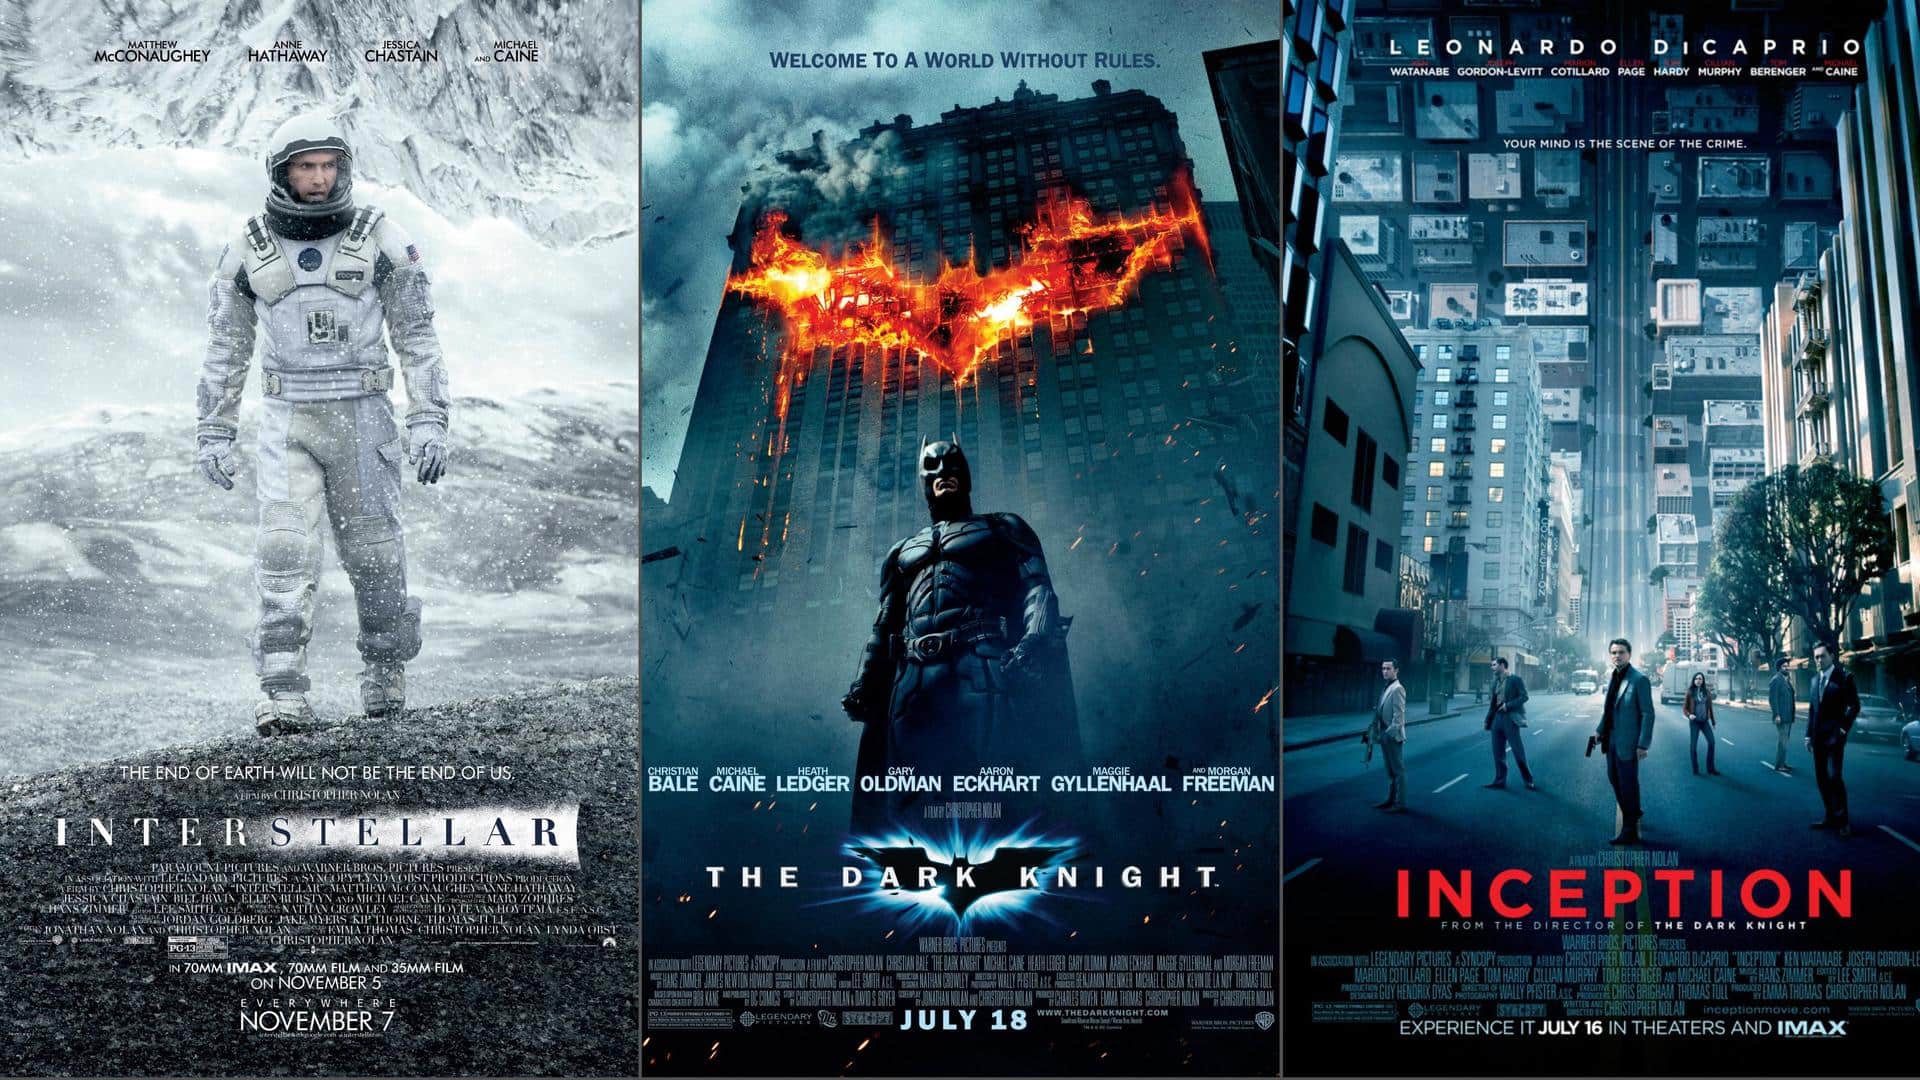 From 'The Prestige' to 'Inception': Top IMDb-rated Christopher Nolan films 